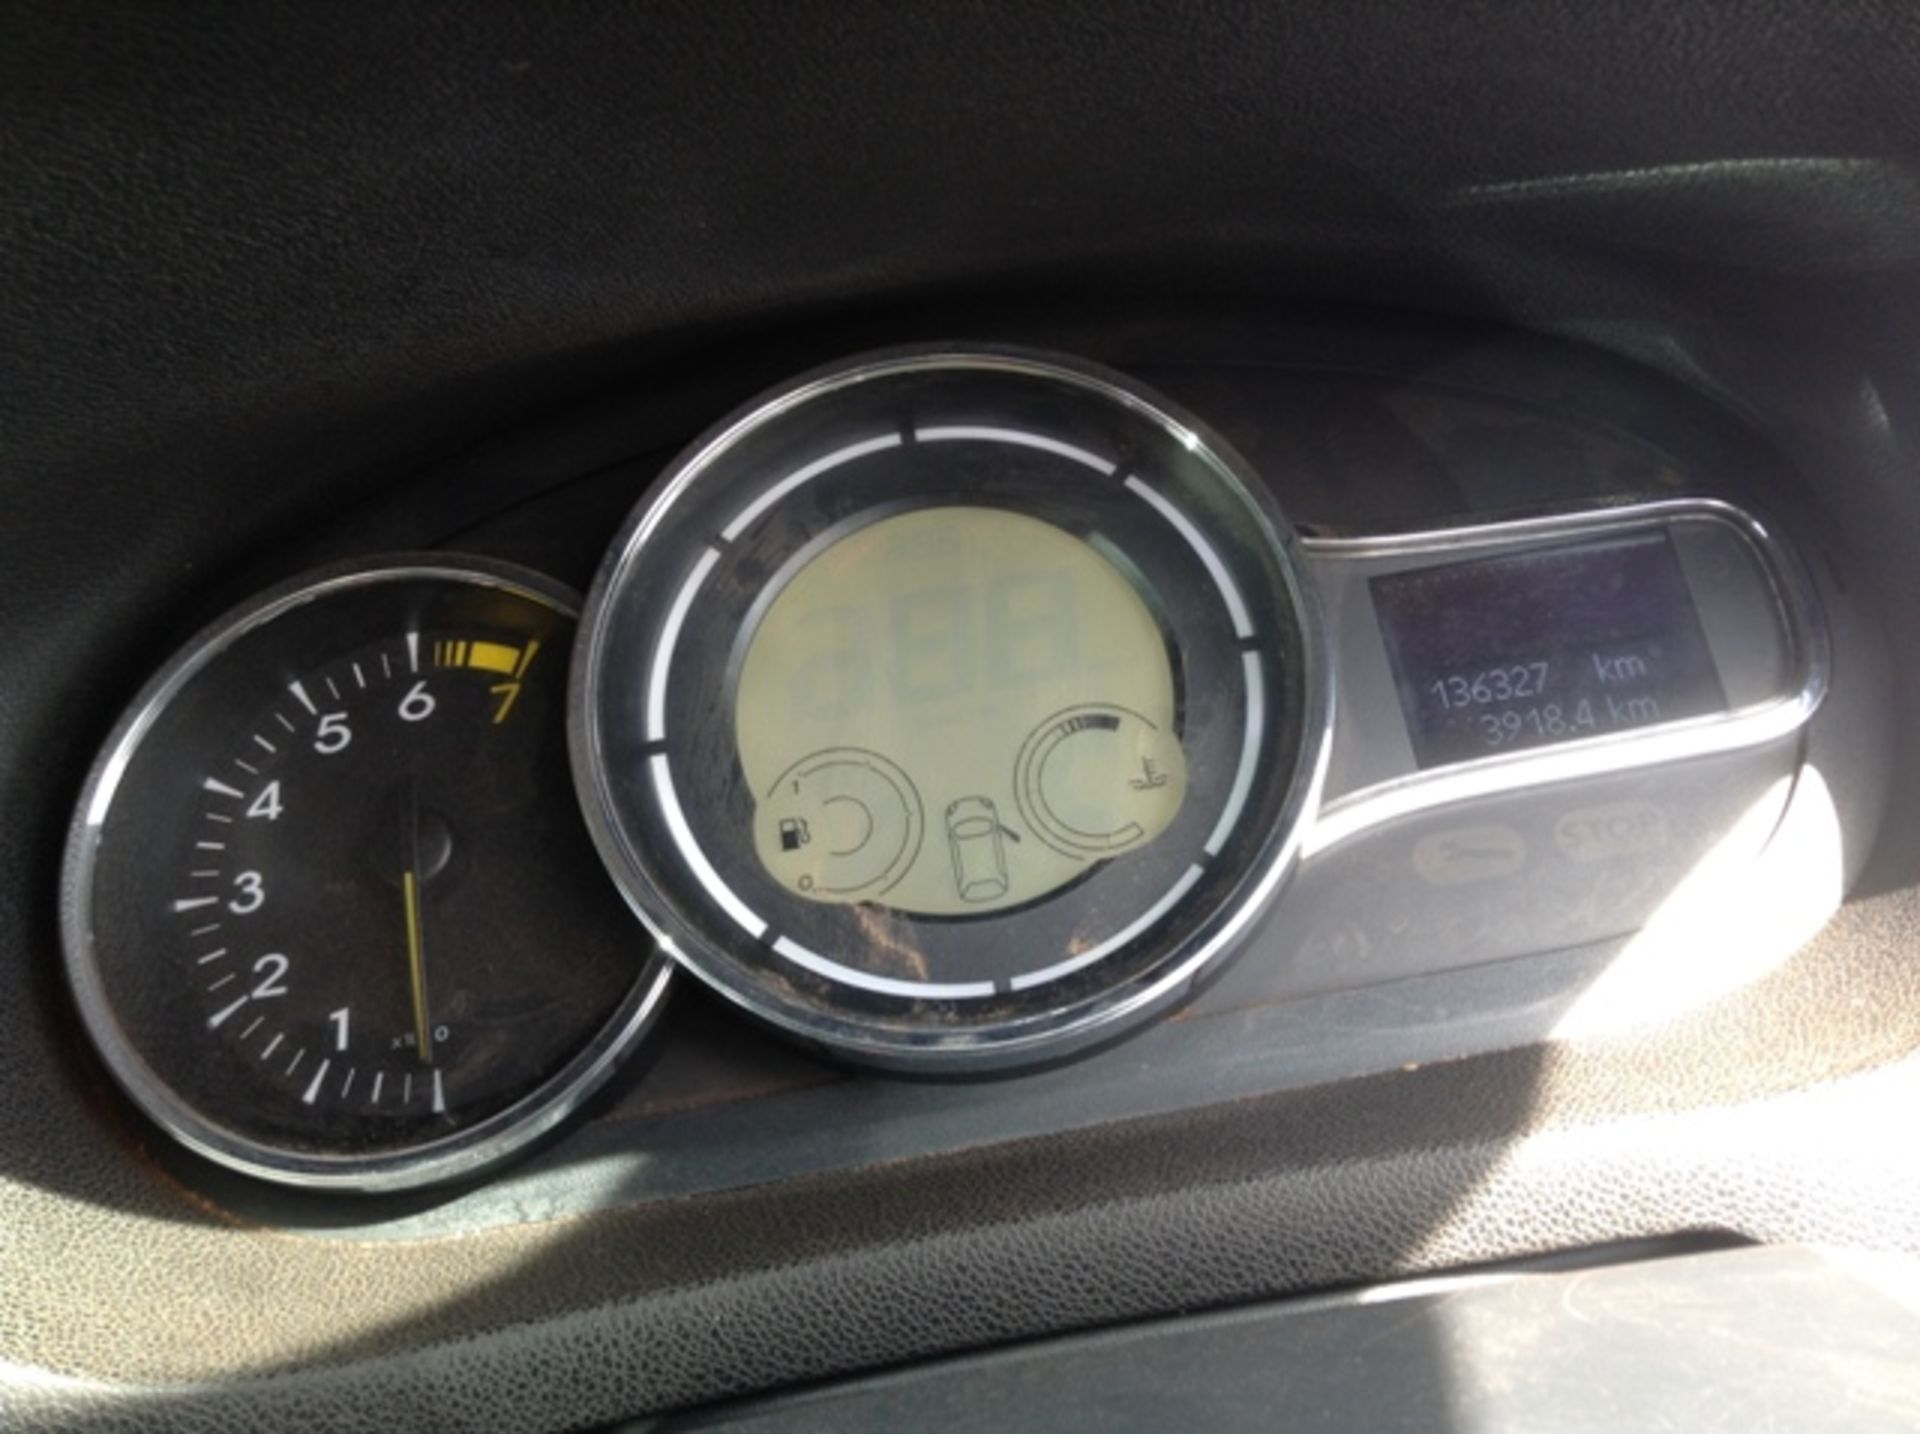 2010 RENAULT MEGANE III 1.6 DYNAMIQUE 5 DR KM 57804 - GEARBOX FAULTY - Image 6 of 7